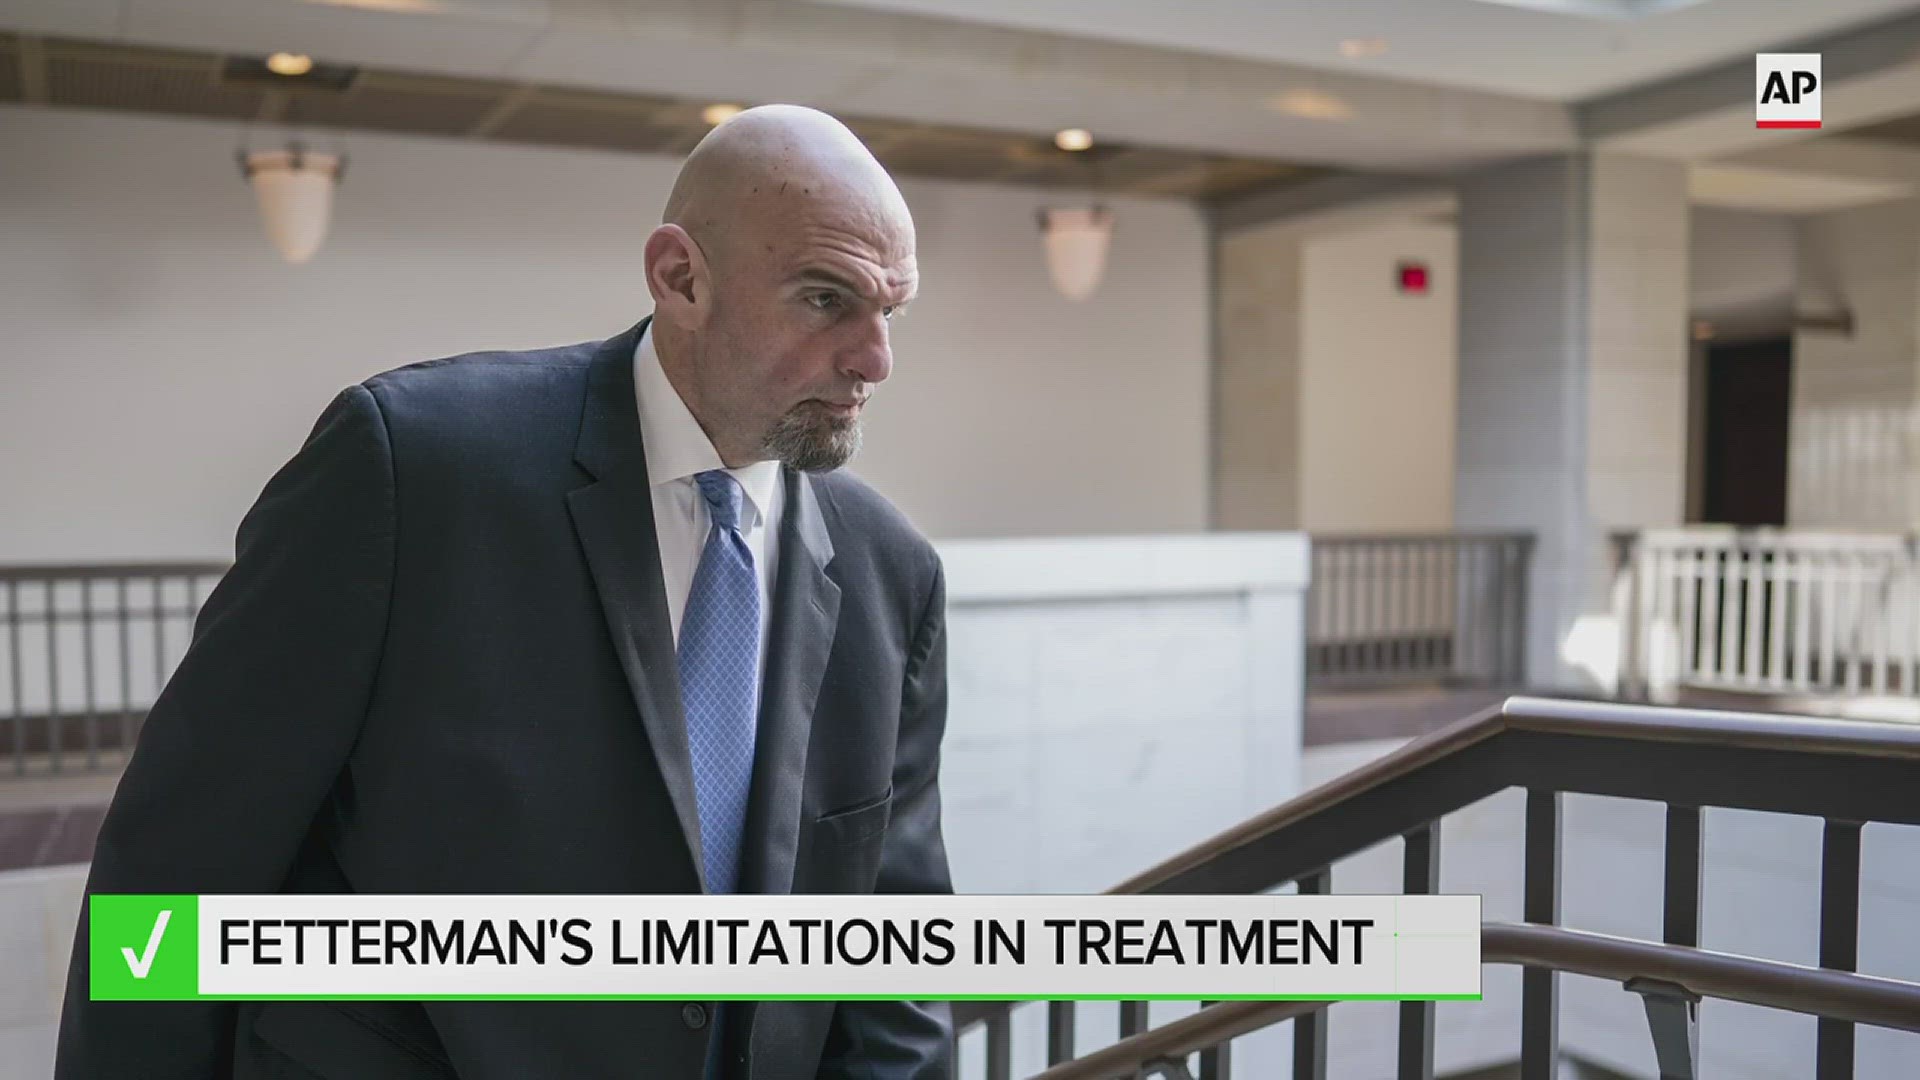 Sen. John Fetterman (D-Pa.) checked himself into inpatient care for clinical depression back on February 15.